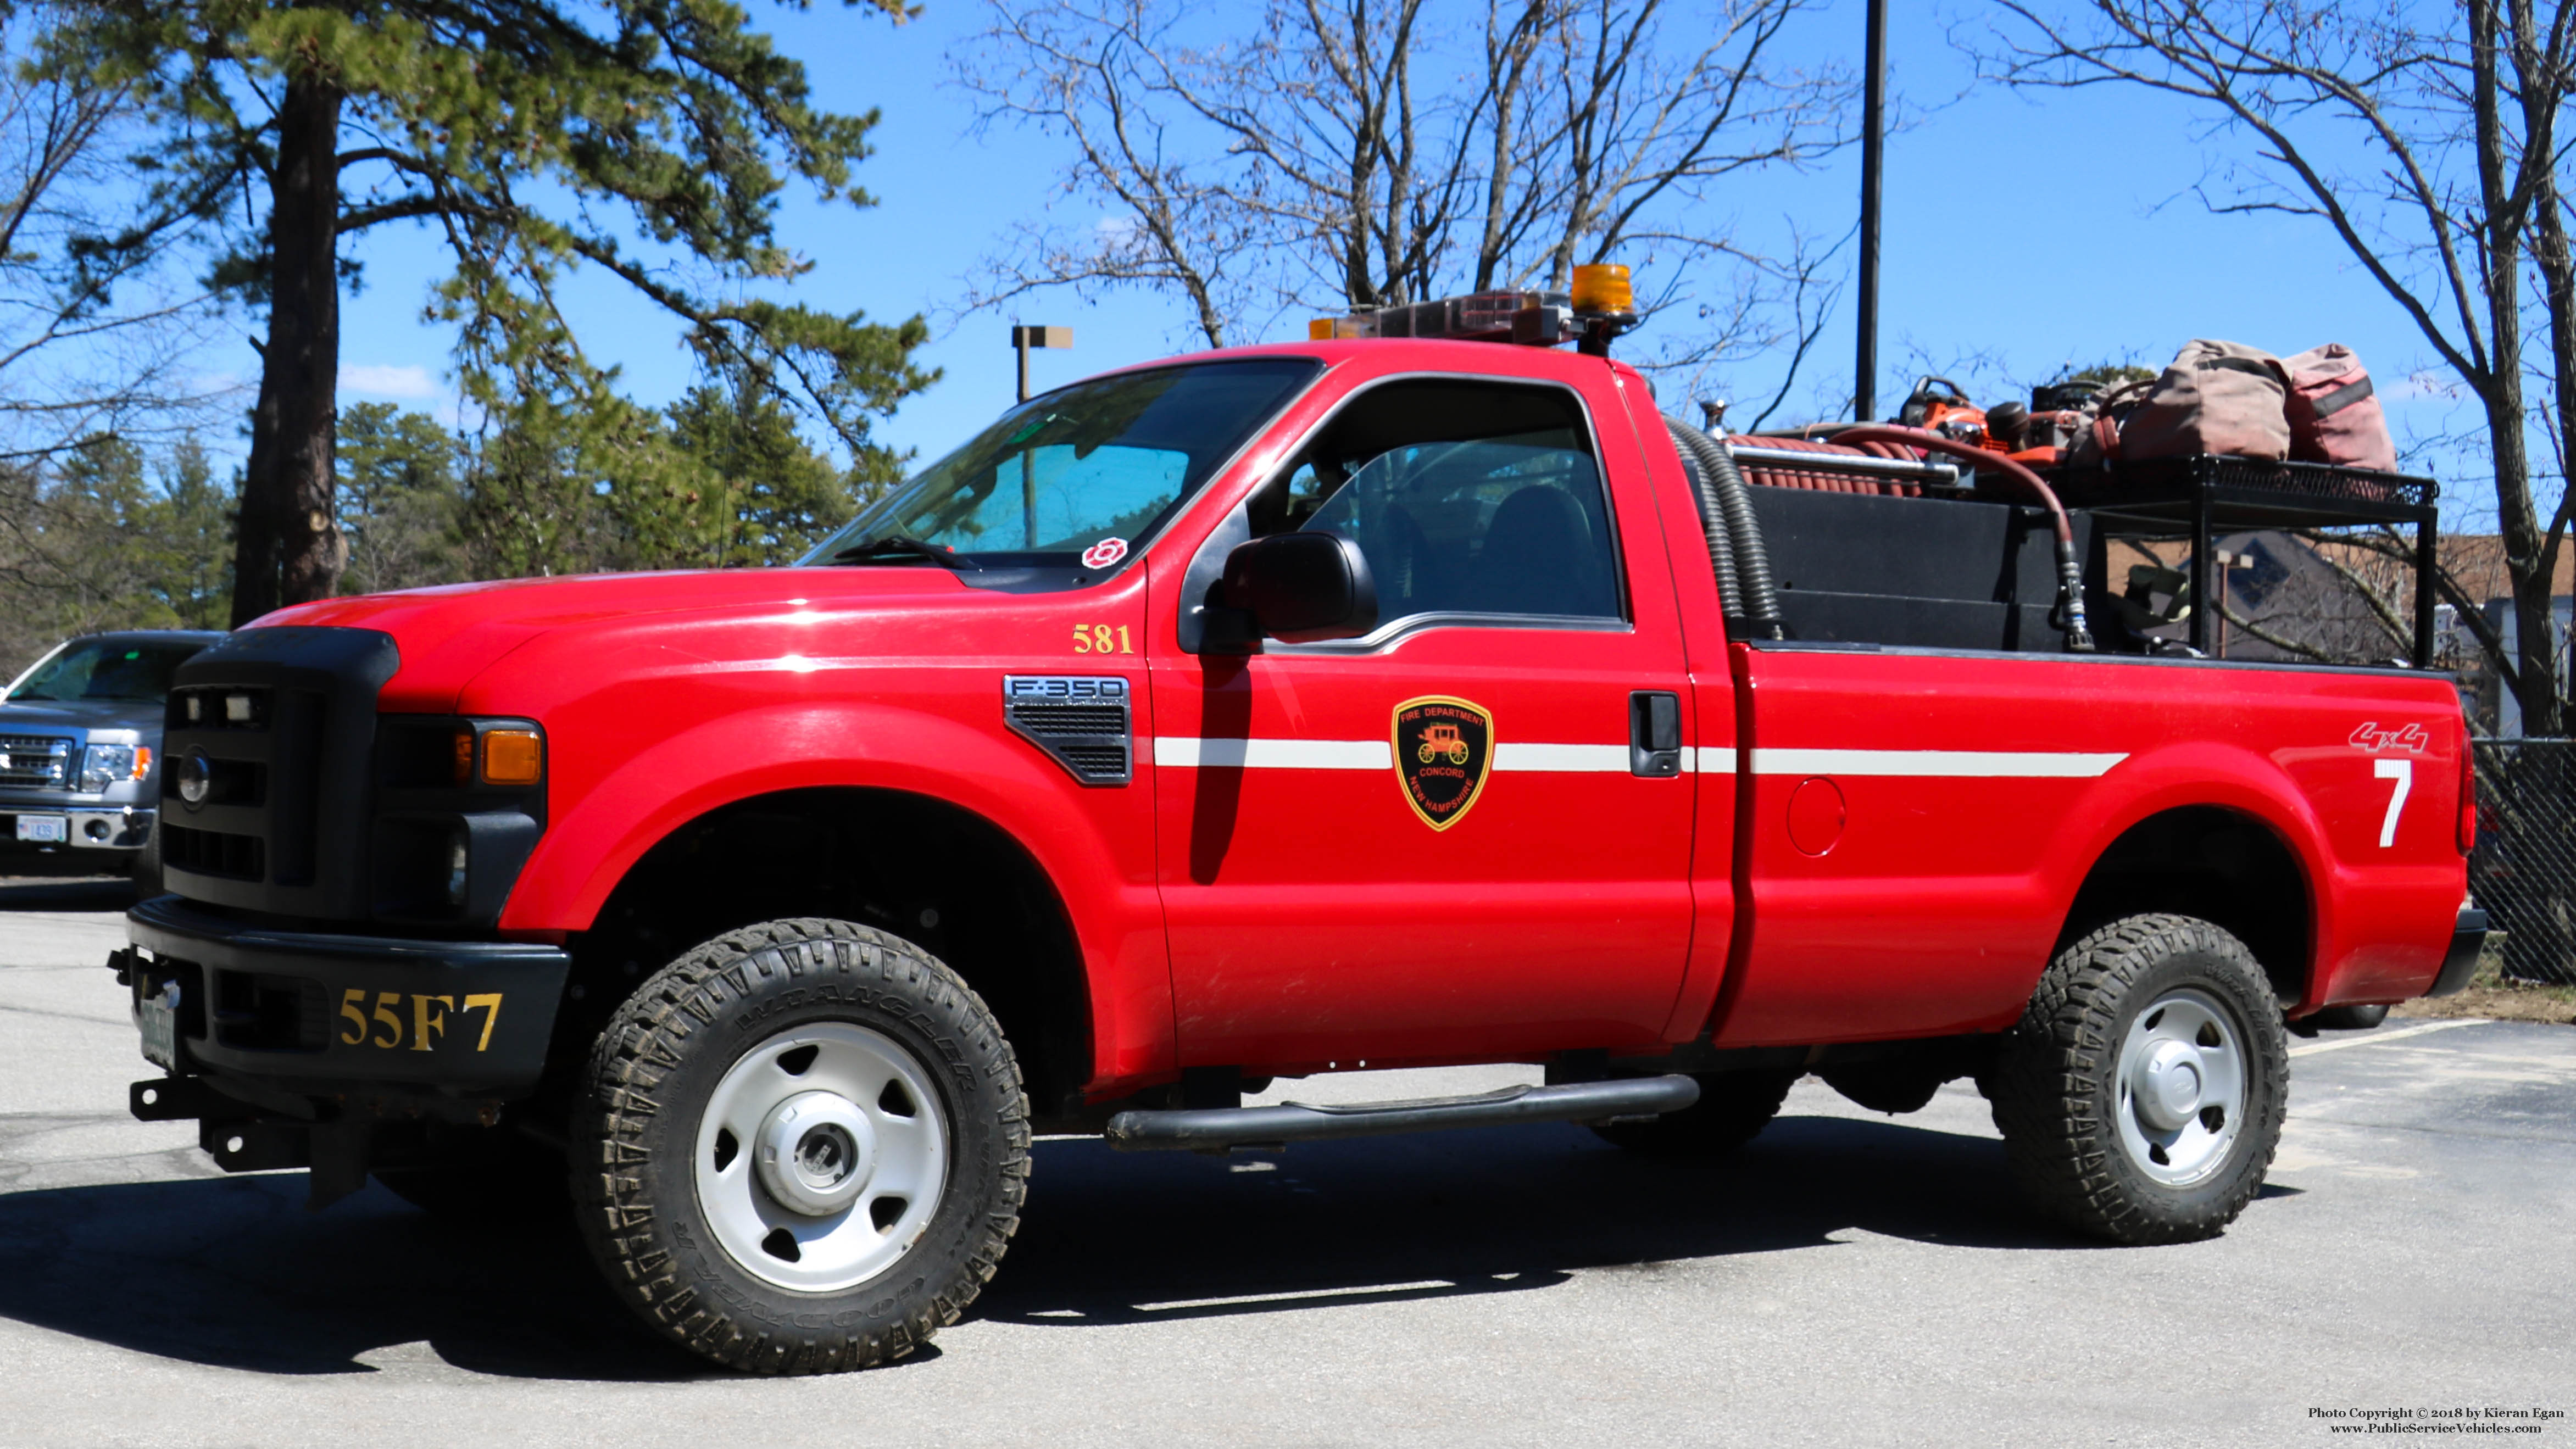 Photo of Forestry 7 - PublicServiceVehicles.com